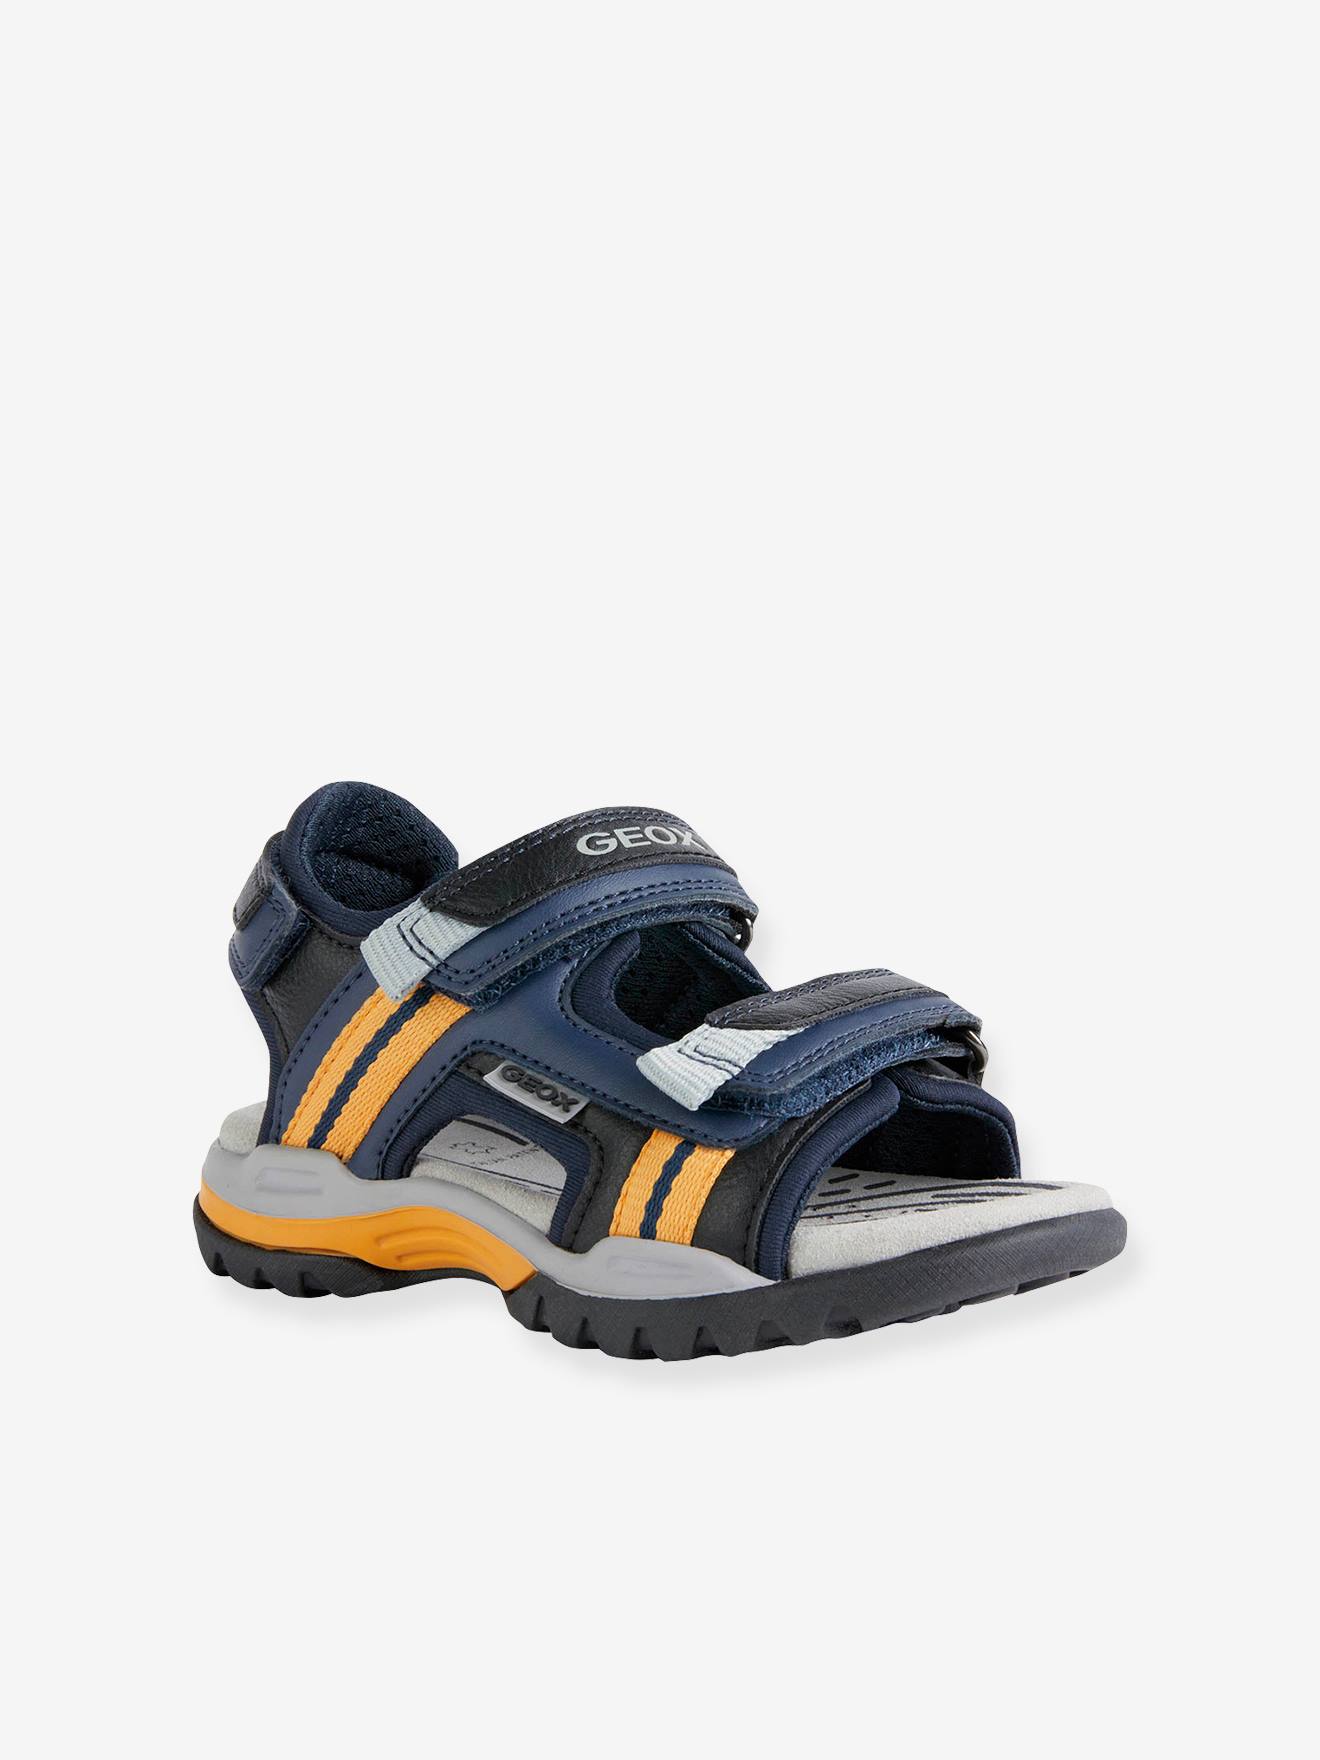 Sandals for Boys, J. Borealis B.A by GEOX® - medium solid,